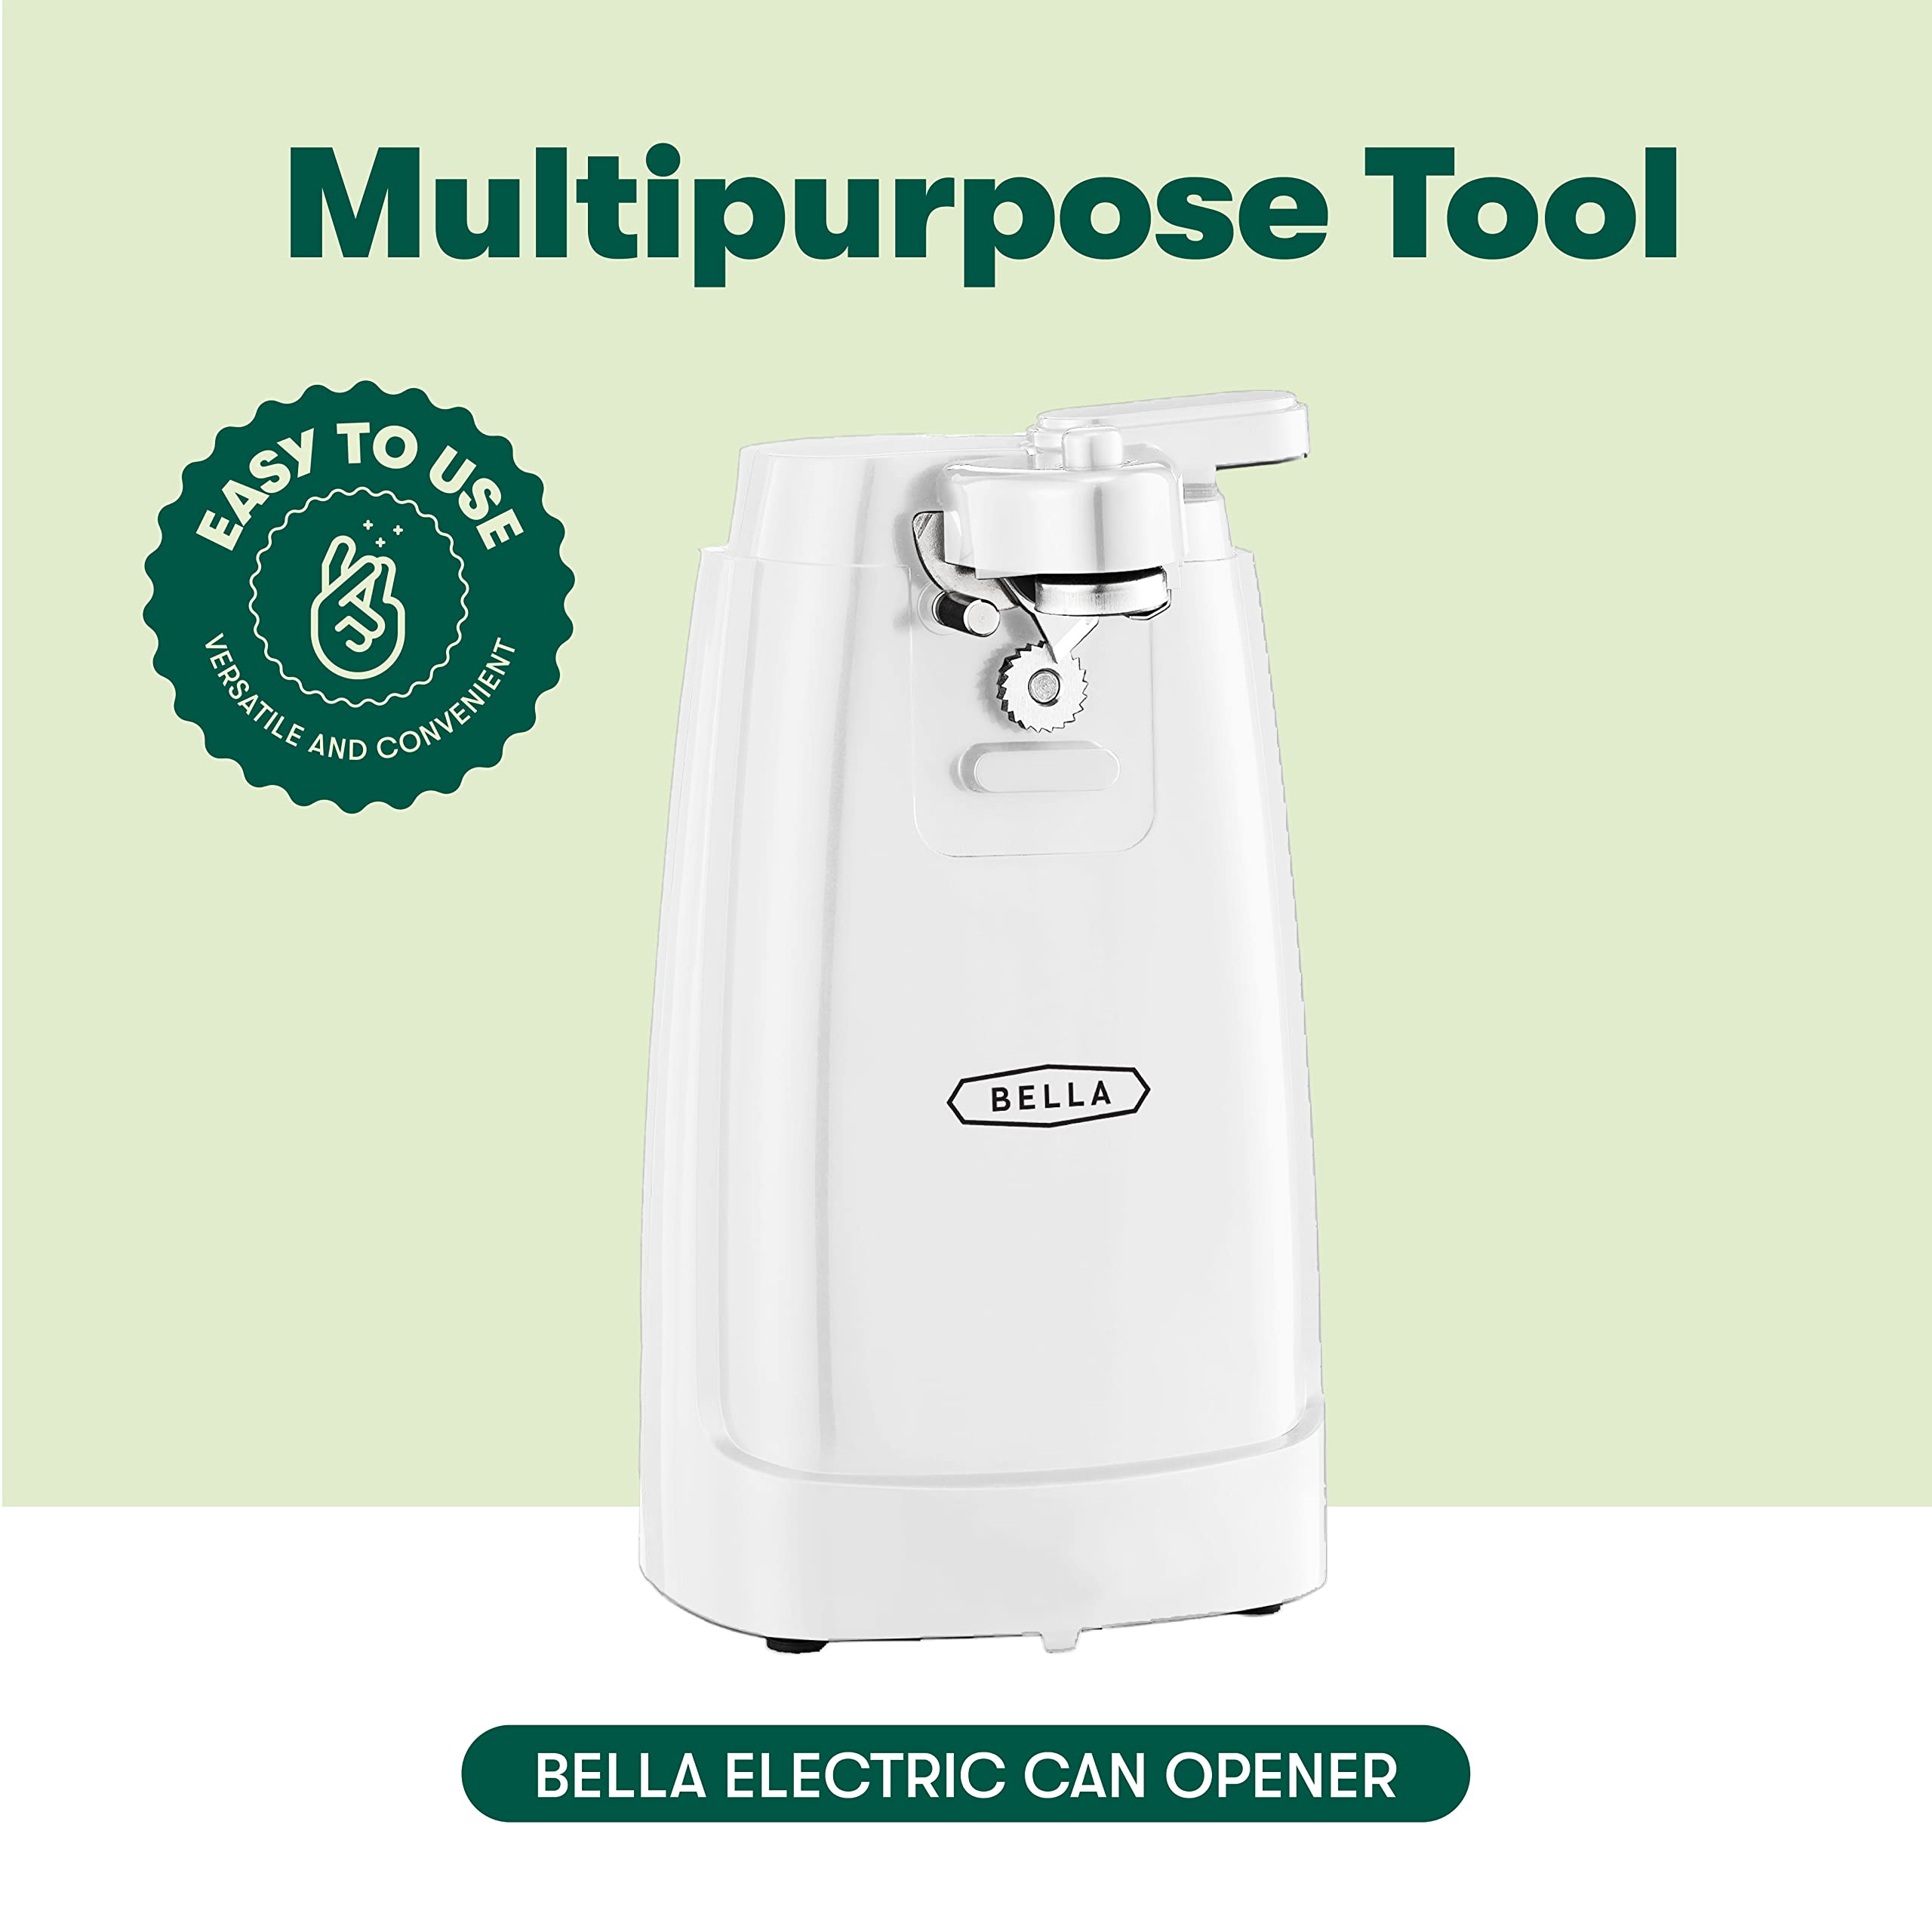 BELLA Electric Can Opener and Knife Sharpener, Multifunctional Jar and Bottle Opener with Removable Cutting Lever and Cord Storage, Stainless Steel Blade, White